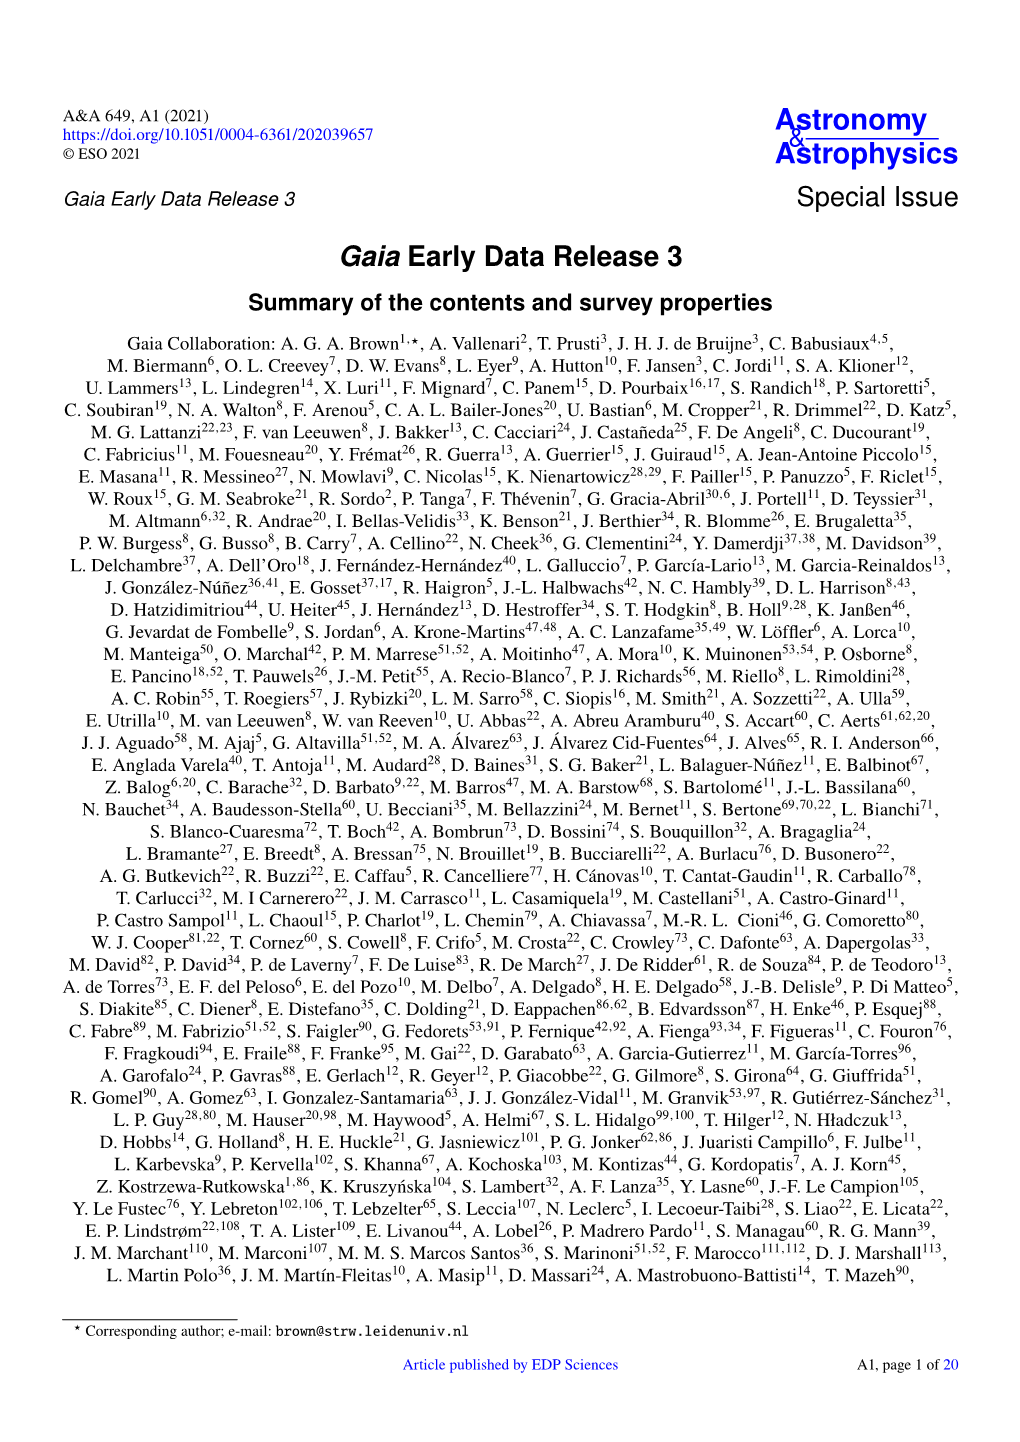 Gaia Early Data Release 3 Special Issue